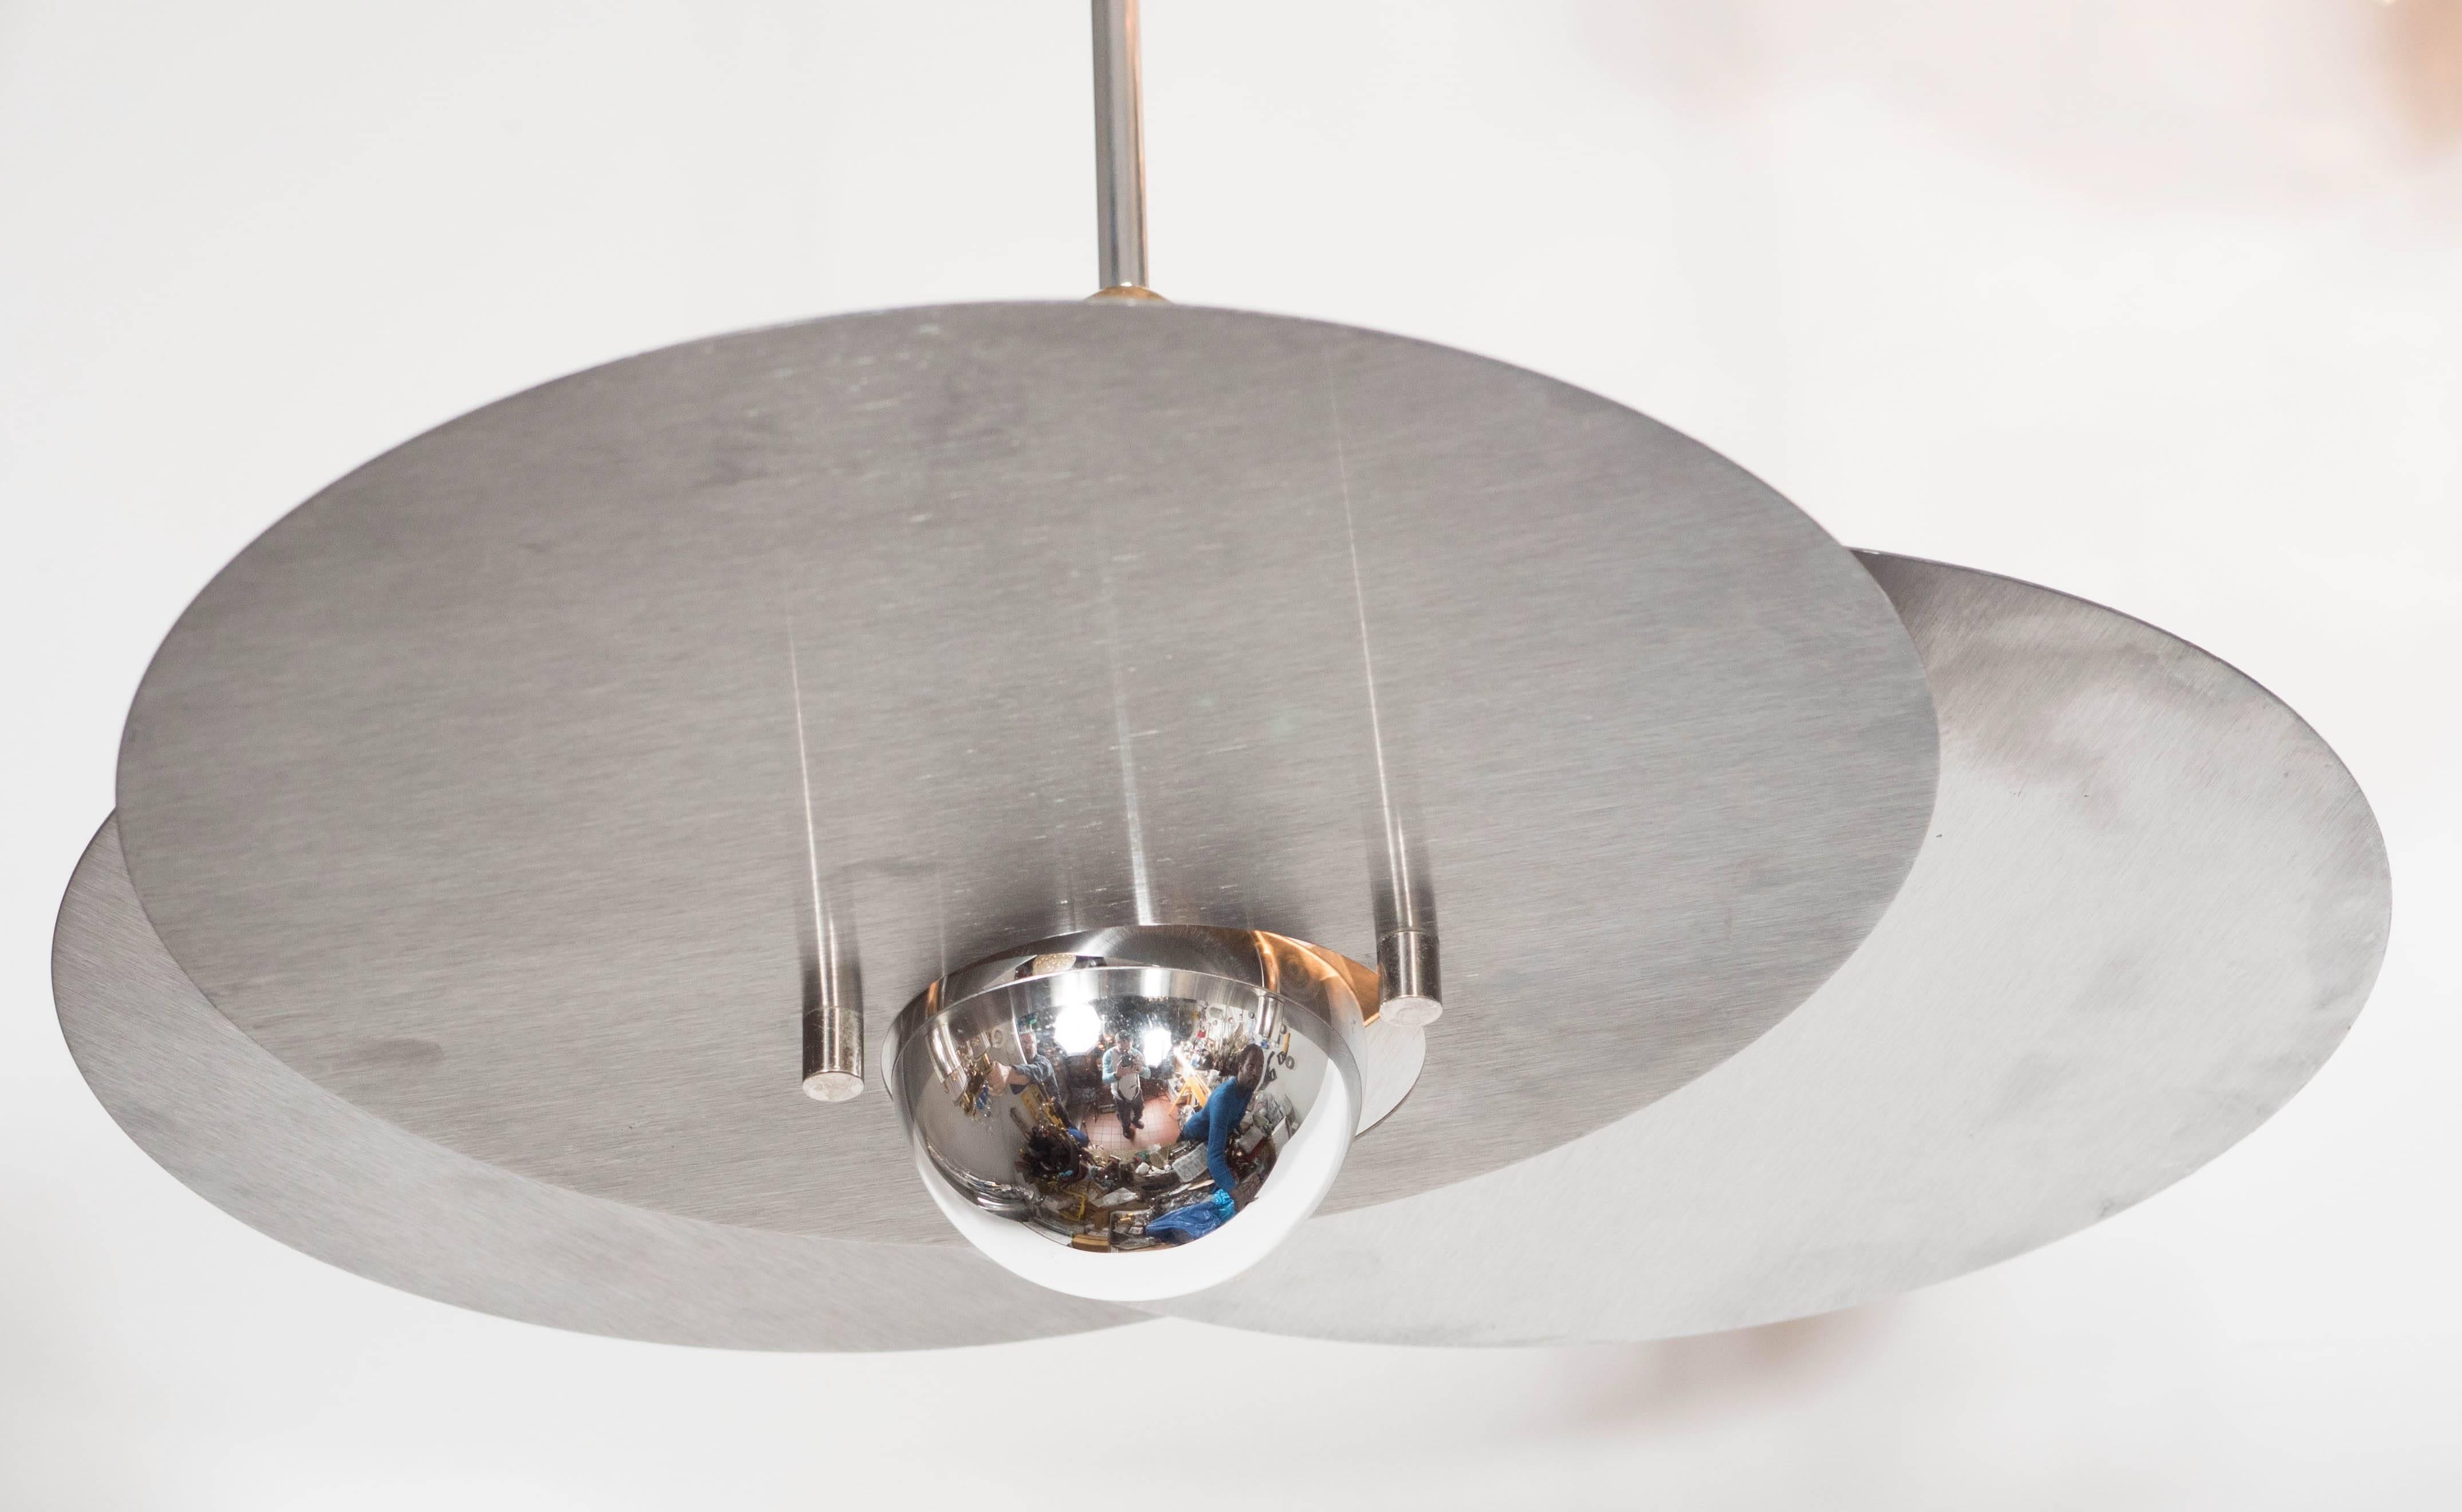 Sculptural Bauhaus Style Mid-Century Modernist Chandelier by Rene Herbst In Excellent Condition For Sale In New York, NY